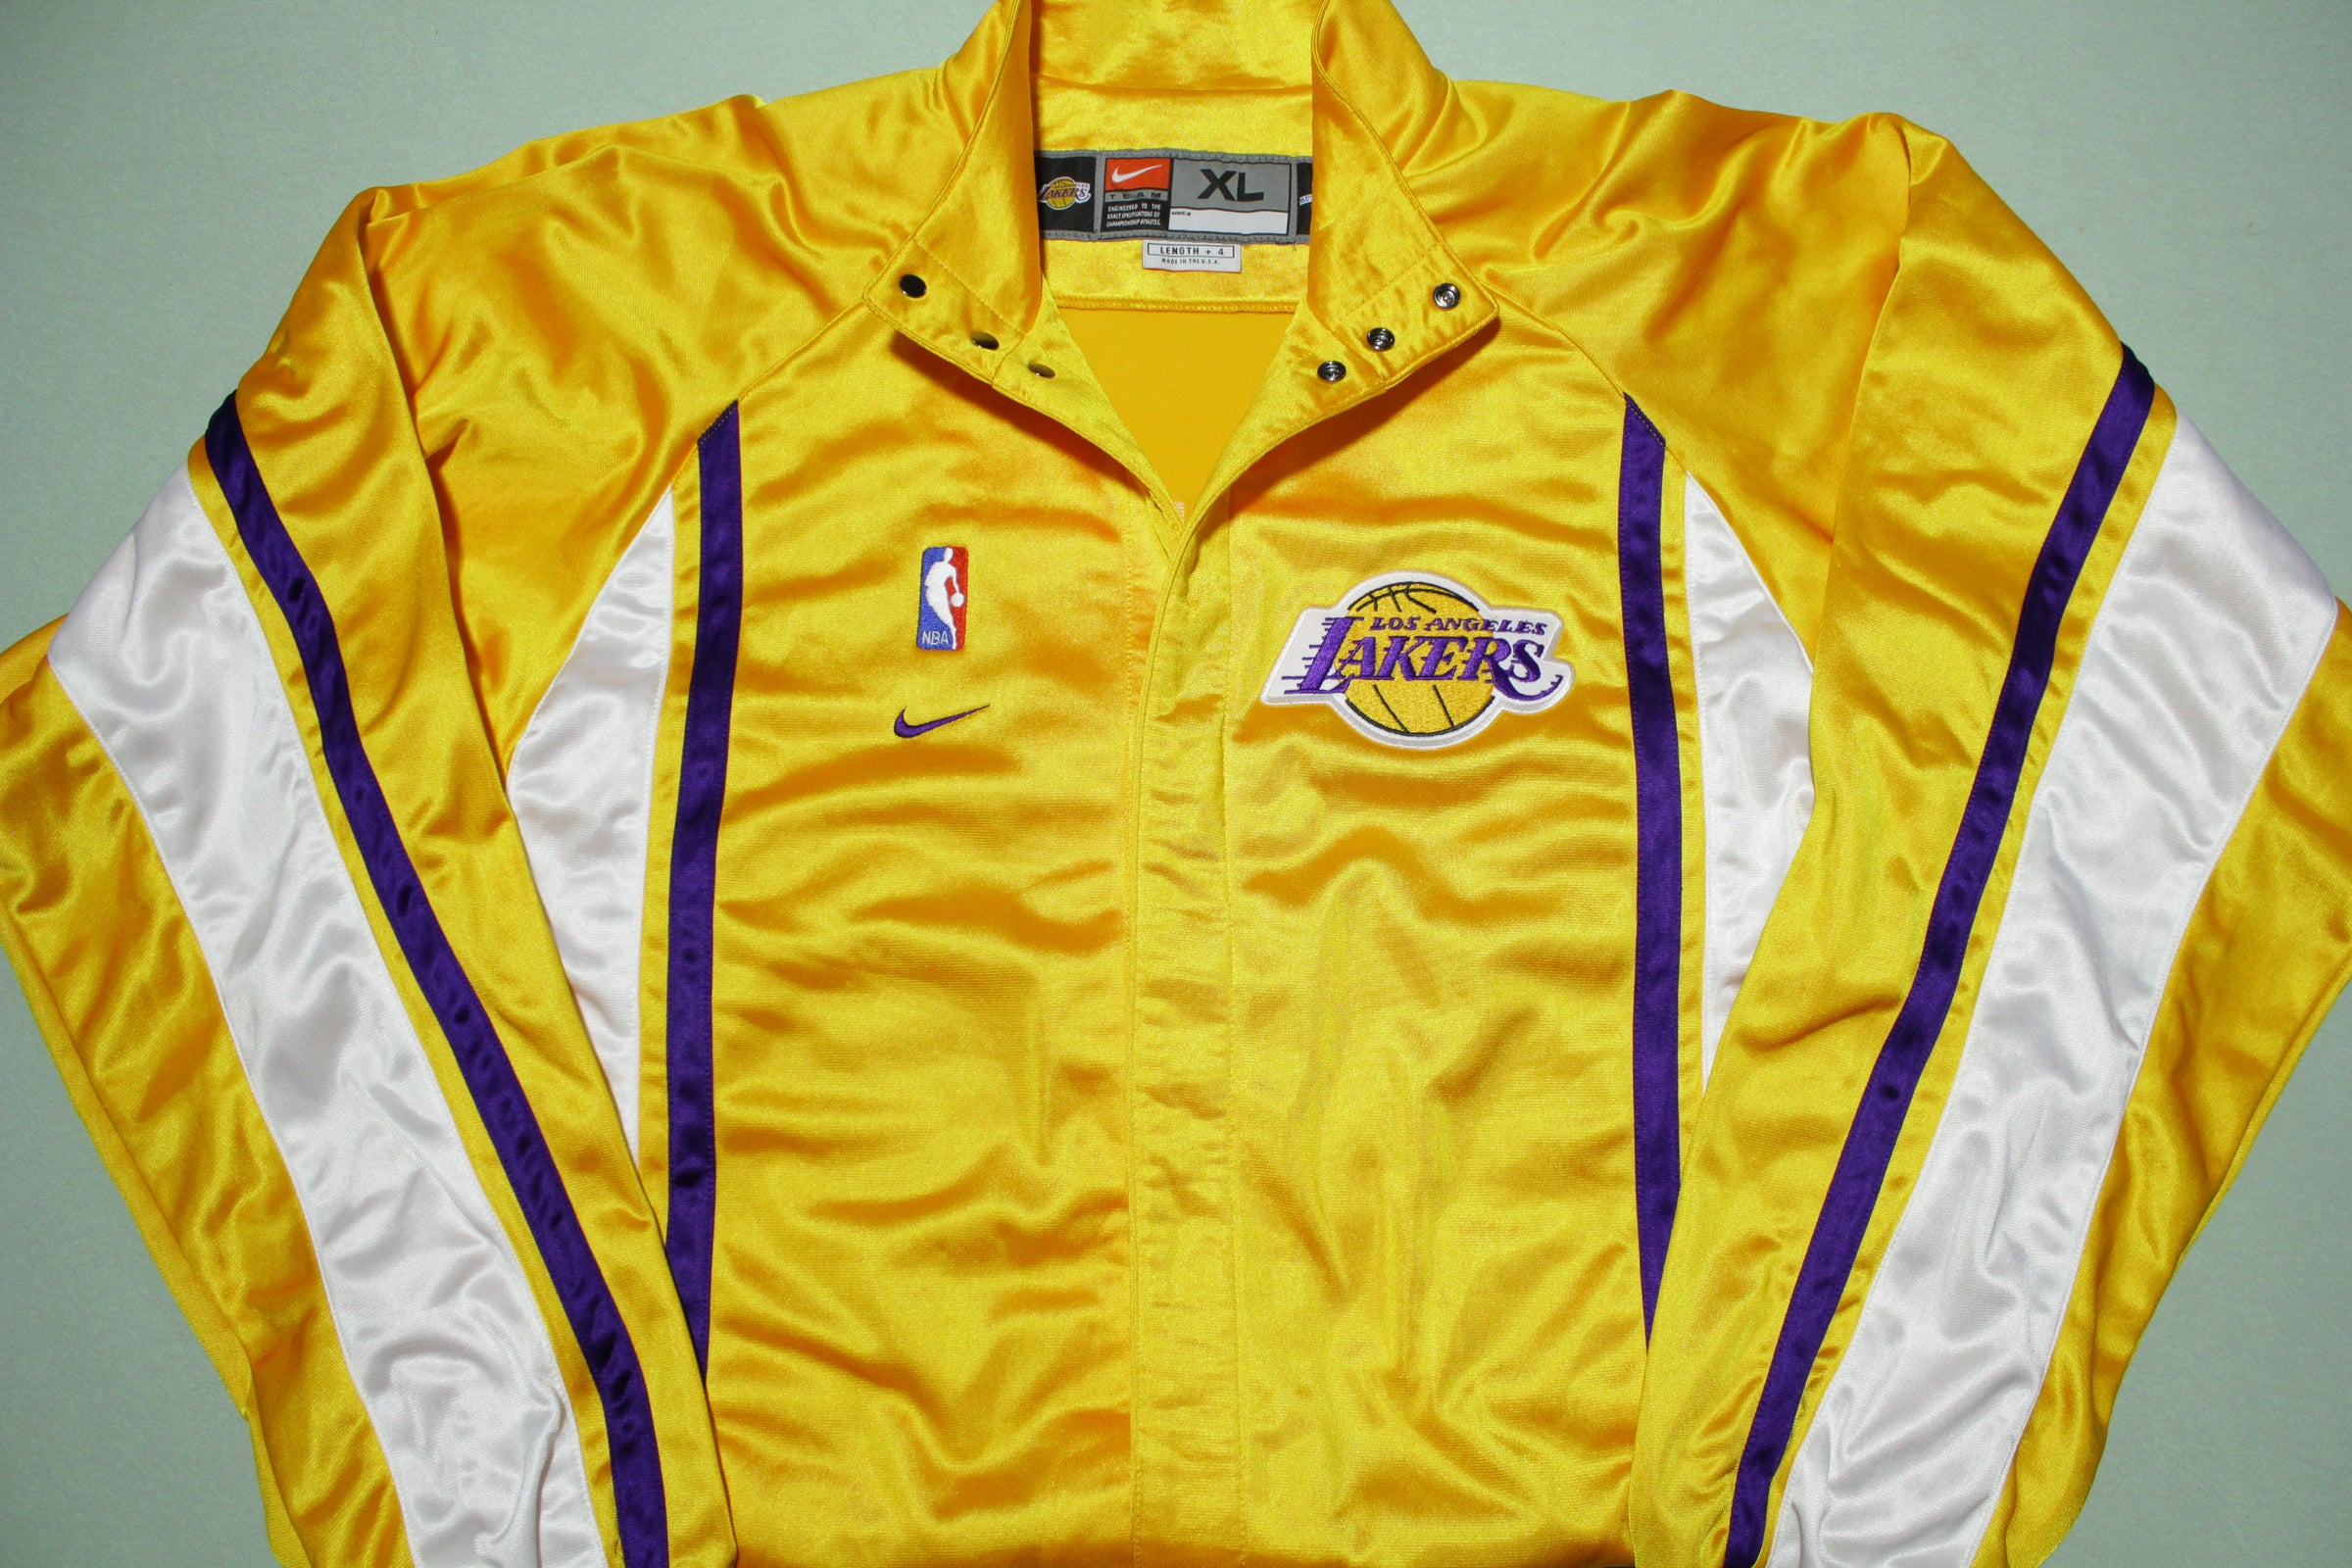 lakers long sleeve warm up